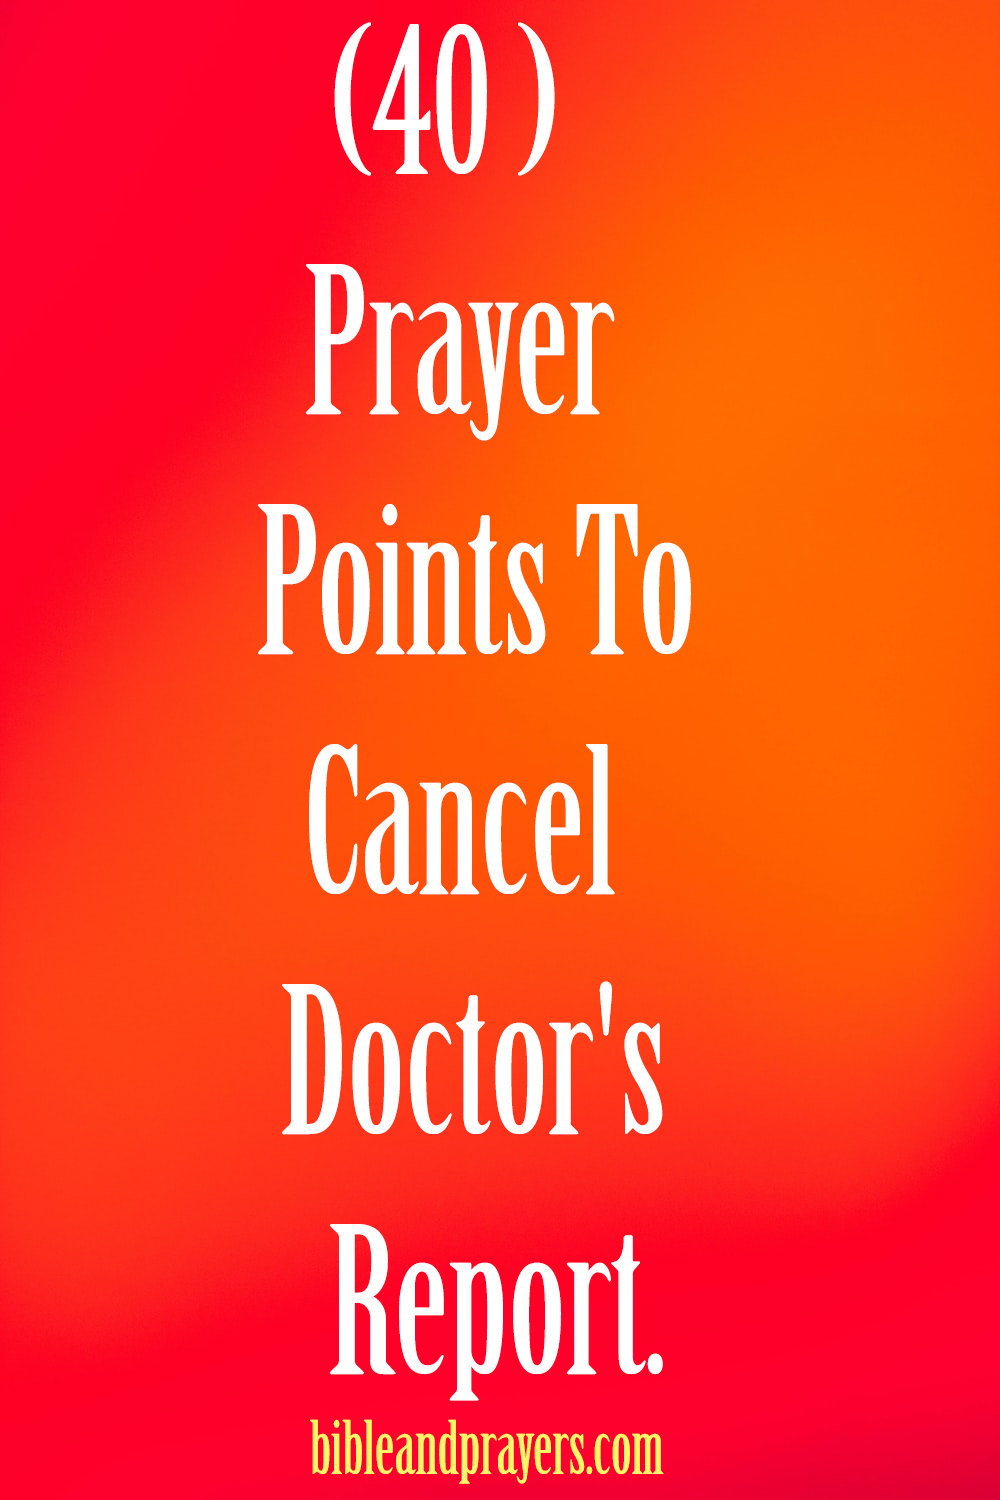 40 Prayer Points To Cancel Doctor's Report.